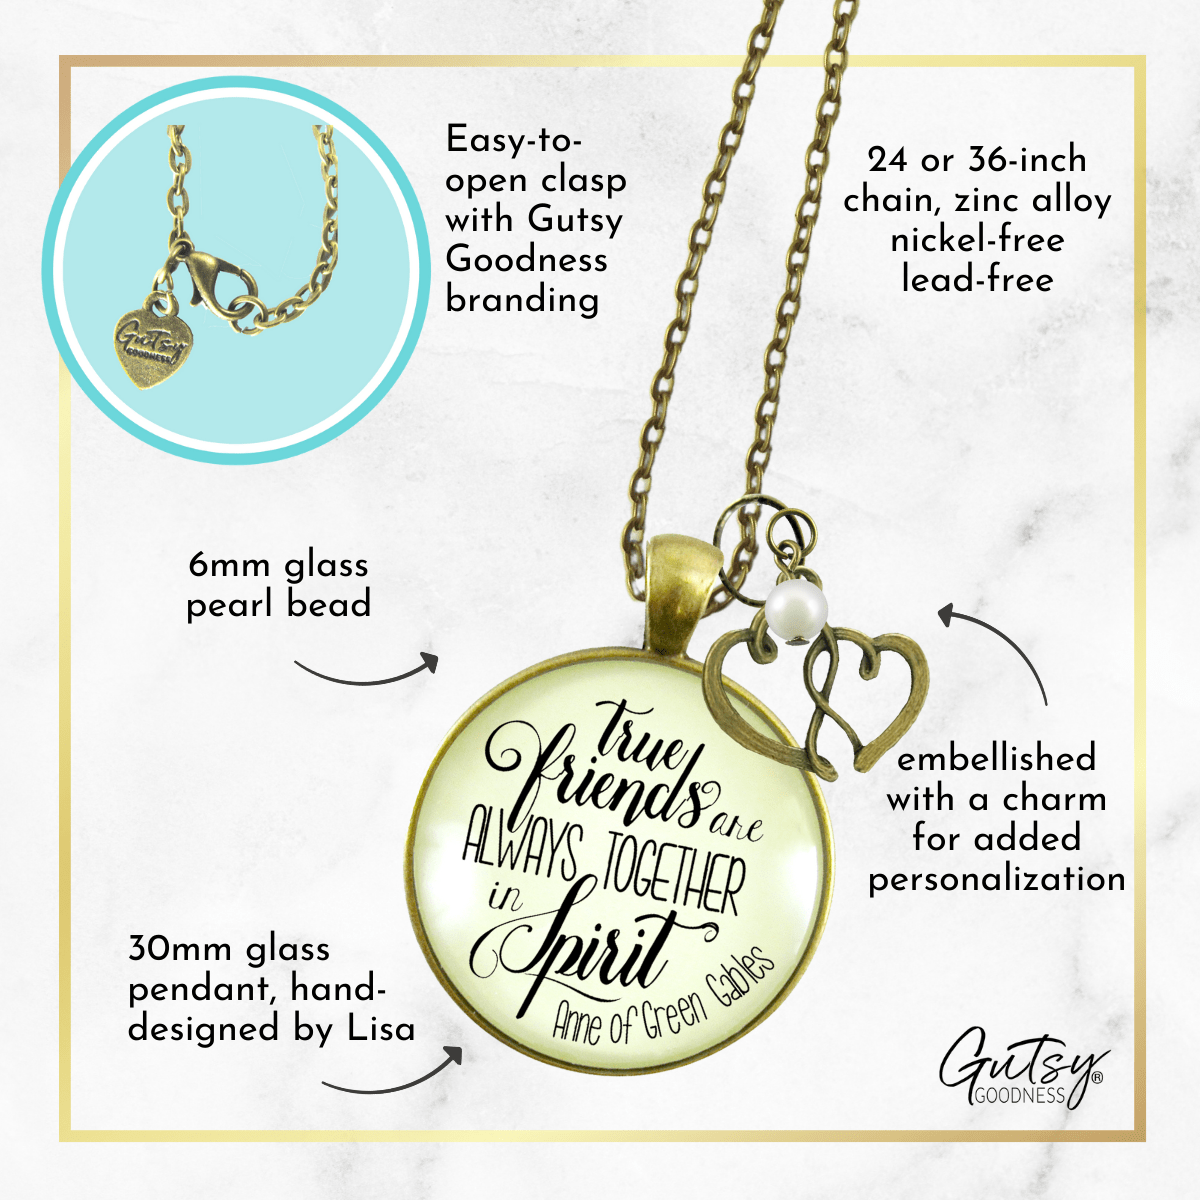 Gutsy Goodness True Friends are Always Together Necklace BFF Literature Quote - Gutsy Goodness Handmade Jewelry;True Friends Are Always Together Necklace Bff Literature Quote - Gutsy Goodness Handmade Jewelry Gifts